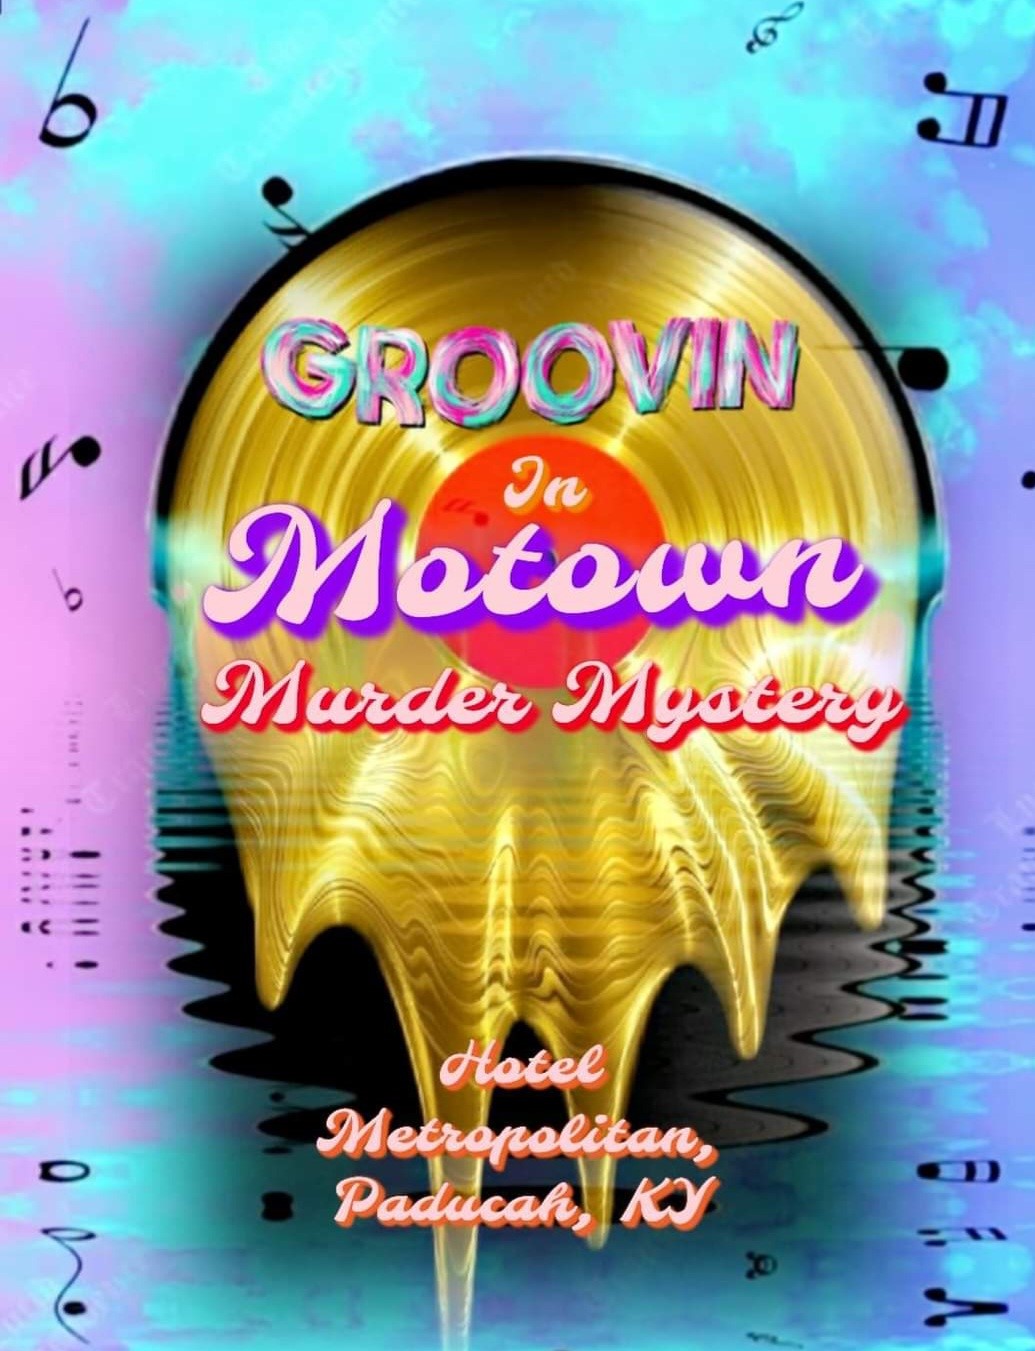 Groovin In MoTown Murder Mystery Event on sep. 10, 17:00@Hotel Metropolitan - Pick a seat, Buy tickets and Get information on Thriller Events thriller.events